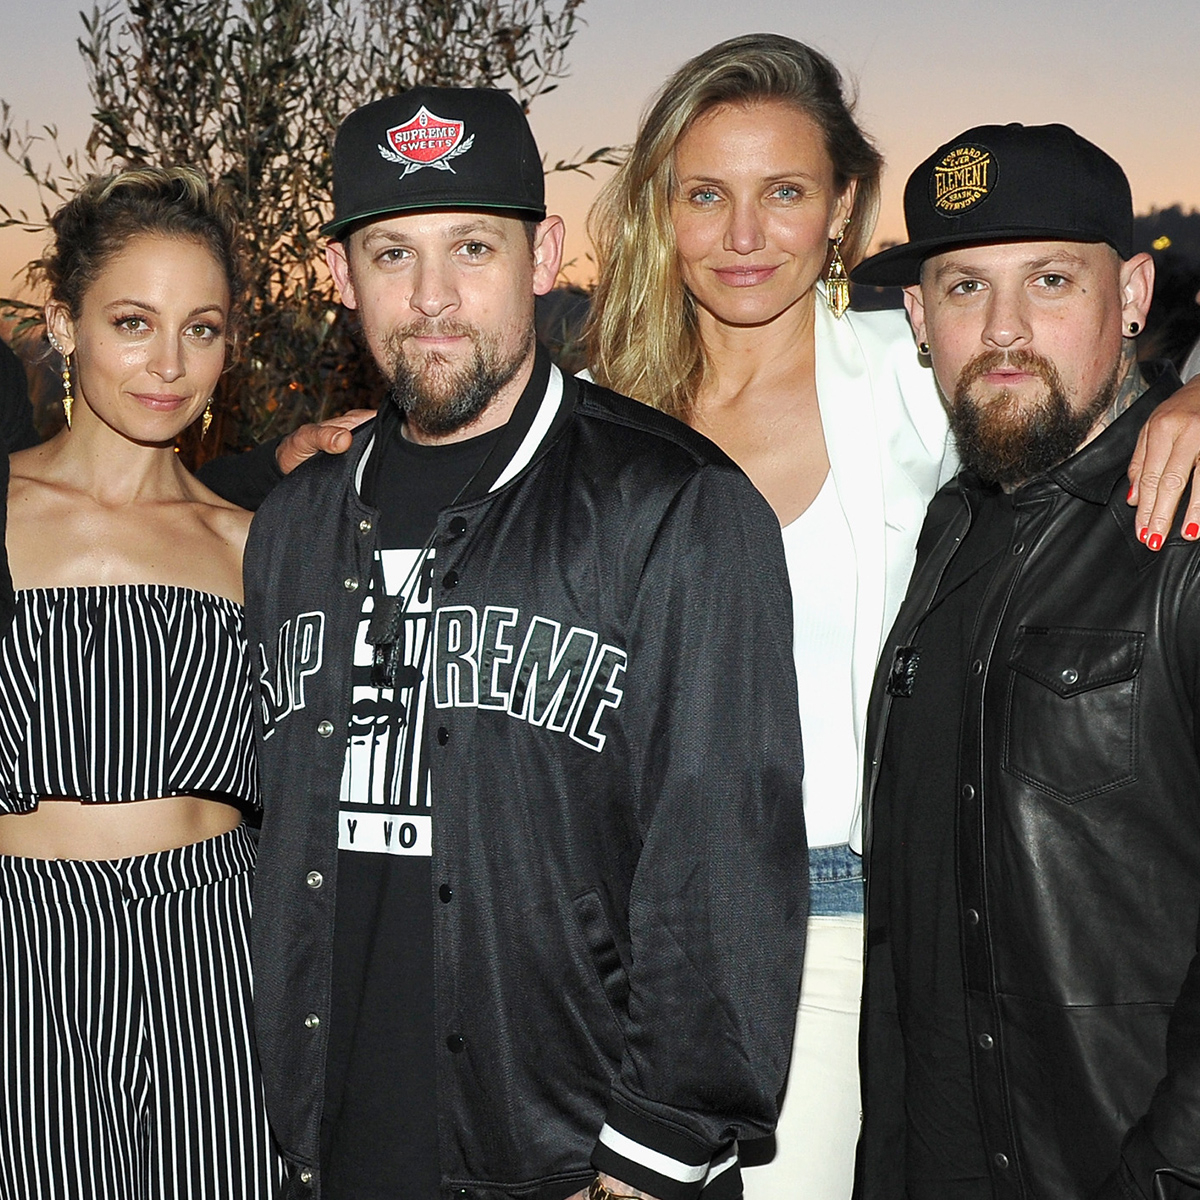 Nicole Richie Calls Cameron Diaz and Benji Madden's Baby Boy the "Absolute Cutest"